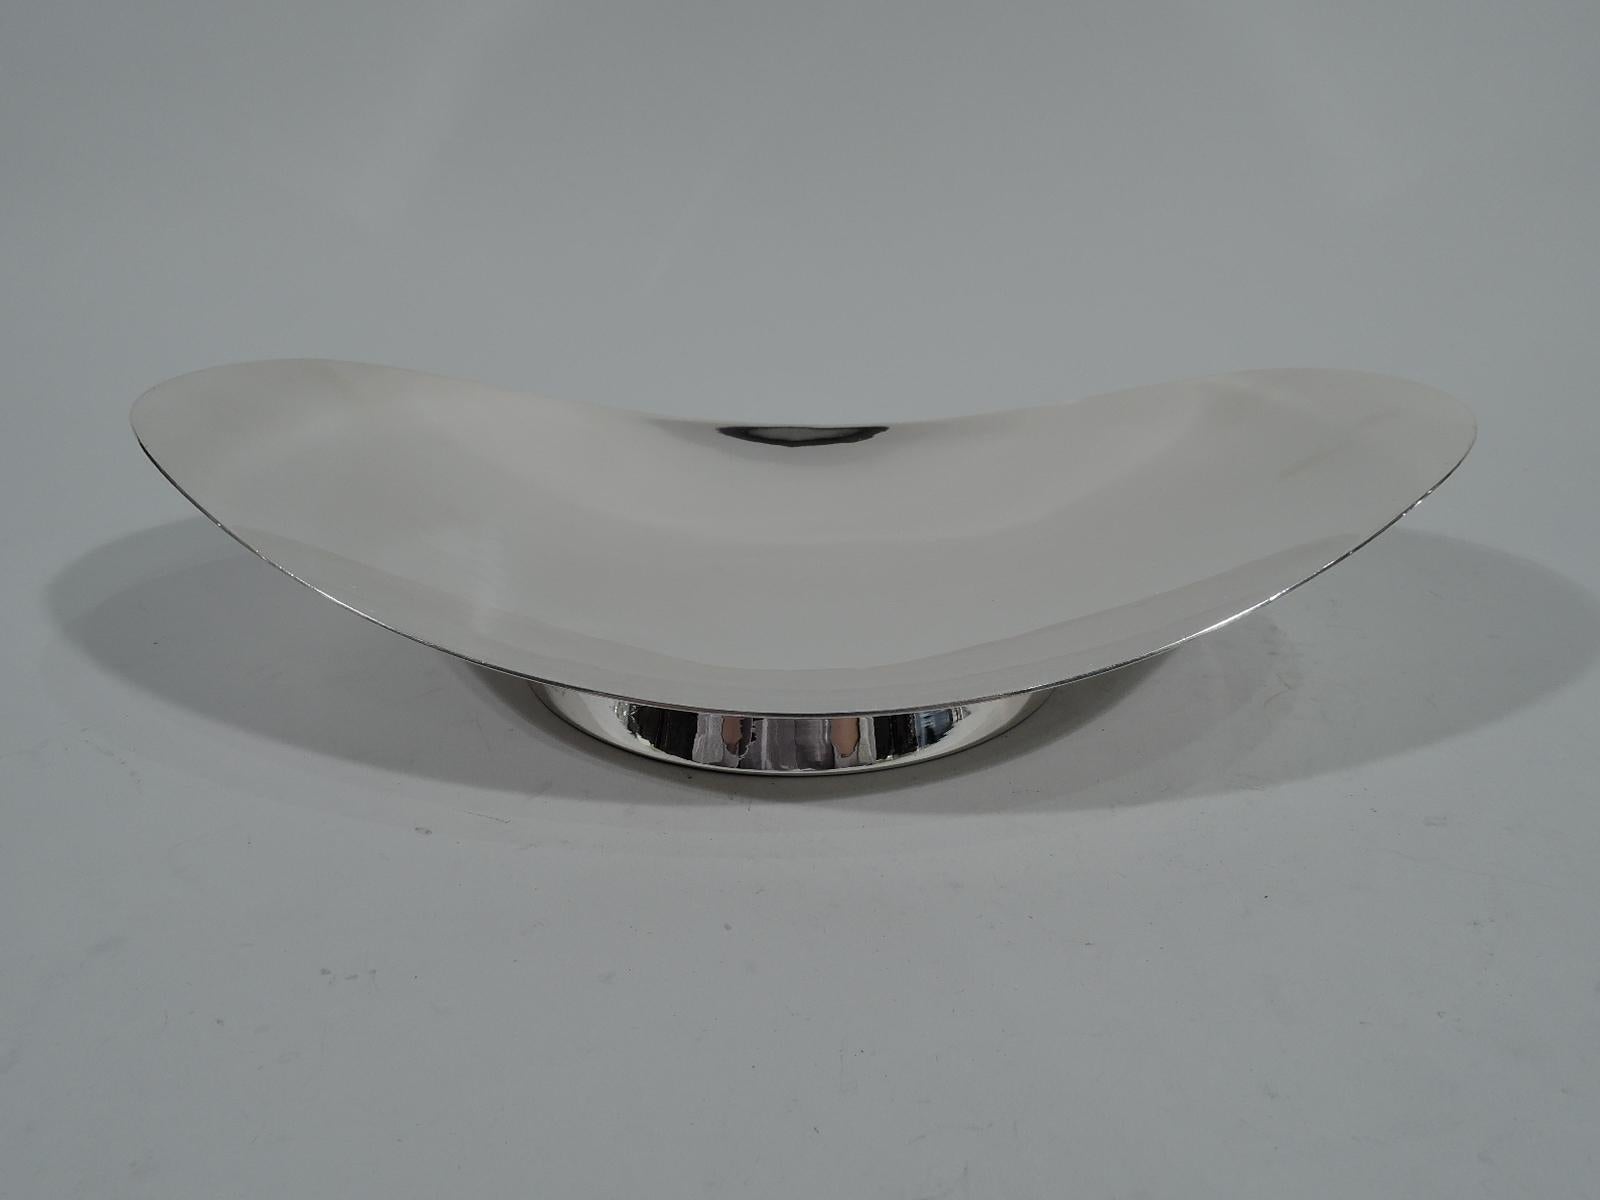 Mid-Century Modern sterling silver bowl. Made by Tiffany & Co. in New York. Shallow oval on short circular foot. Hallmark includes pattern no. 22416 and director’s letter M (1947-56). Weight: 23 troy ounces.